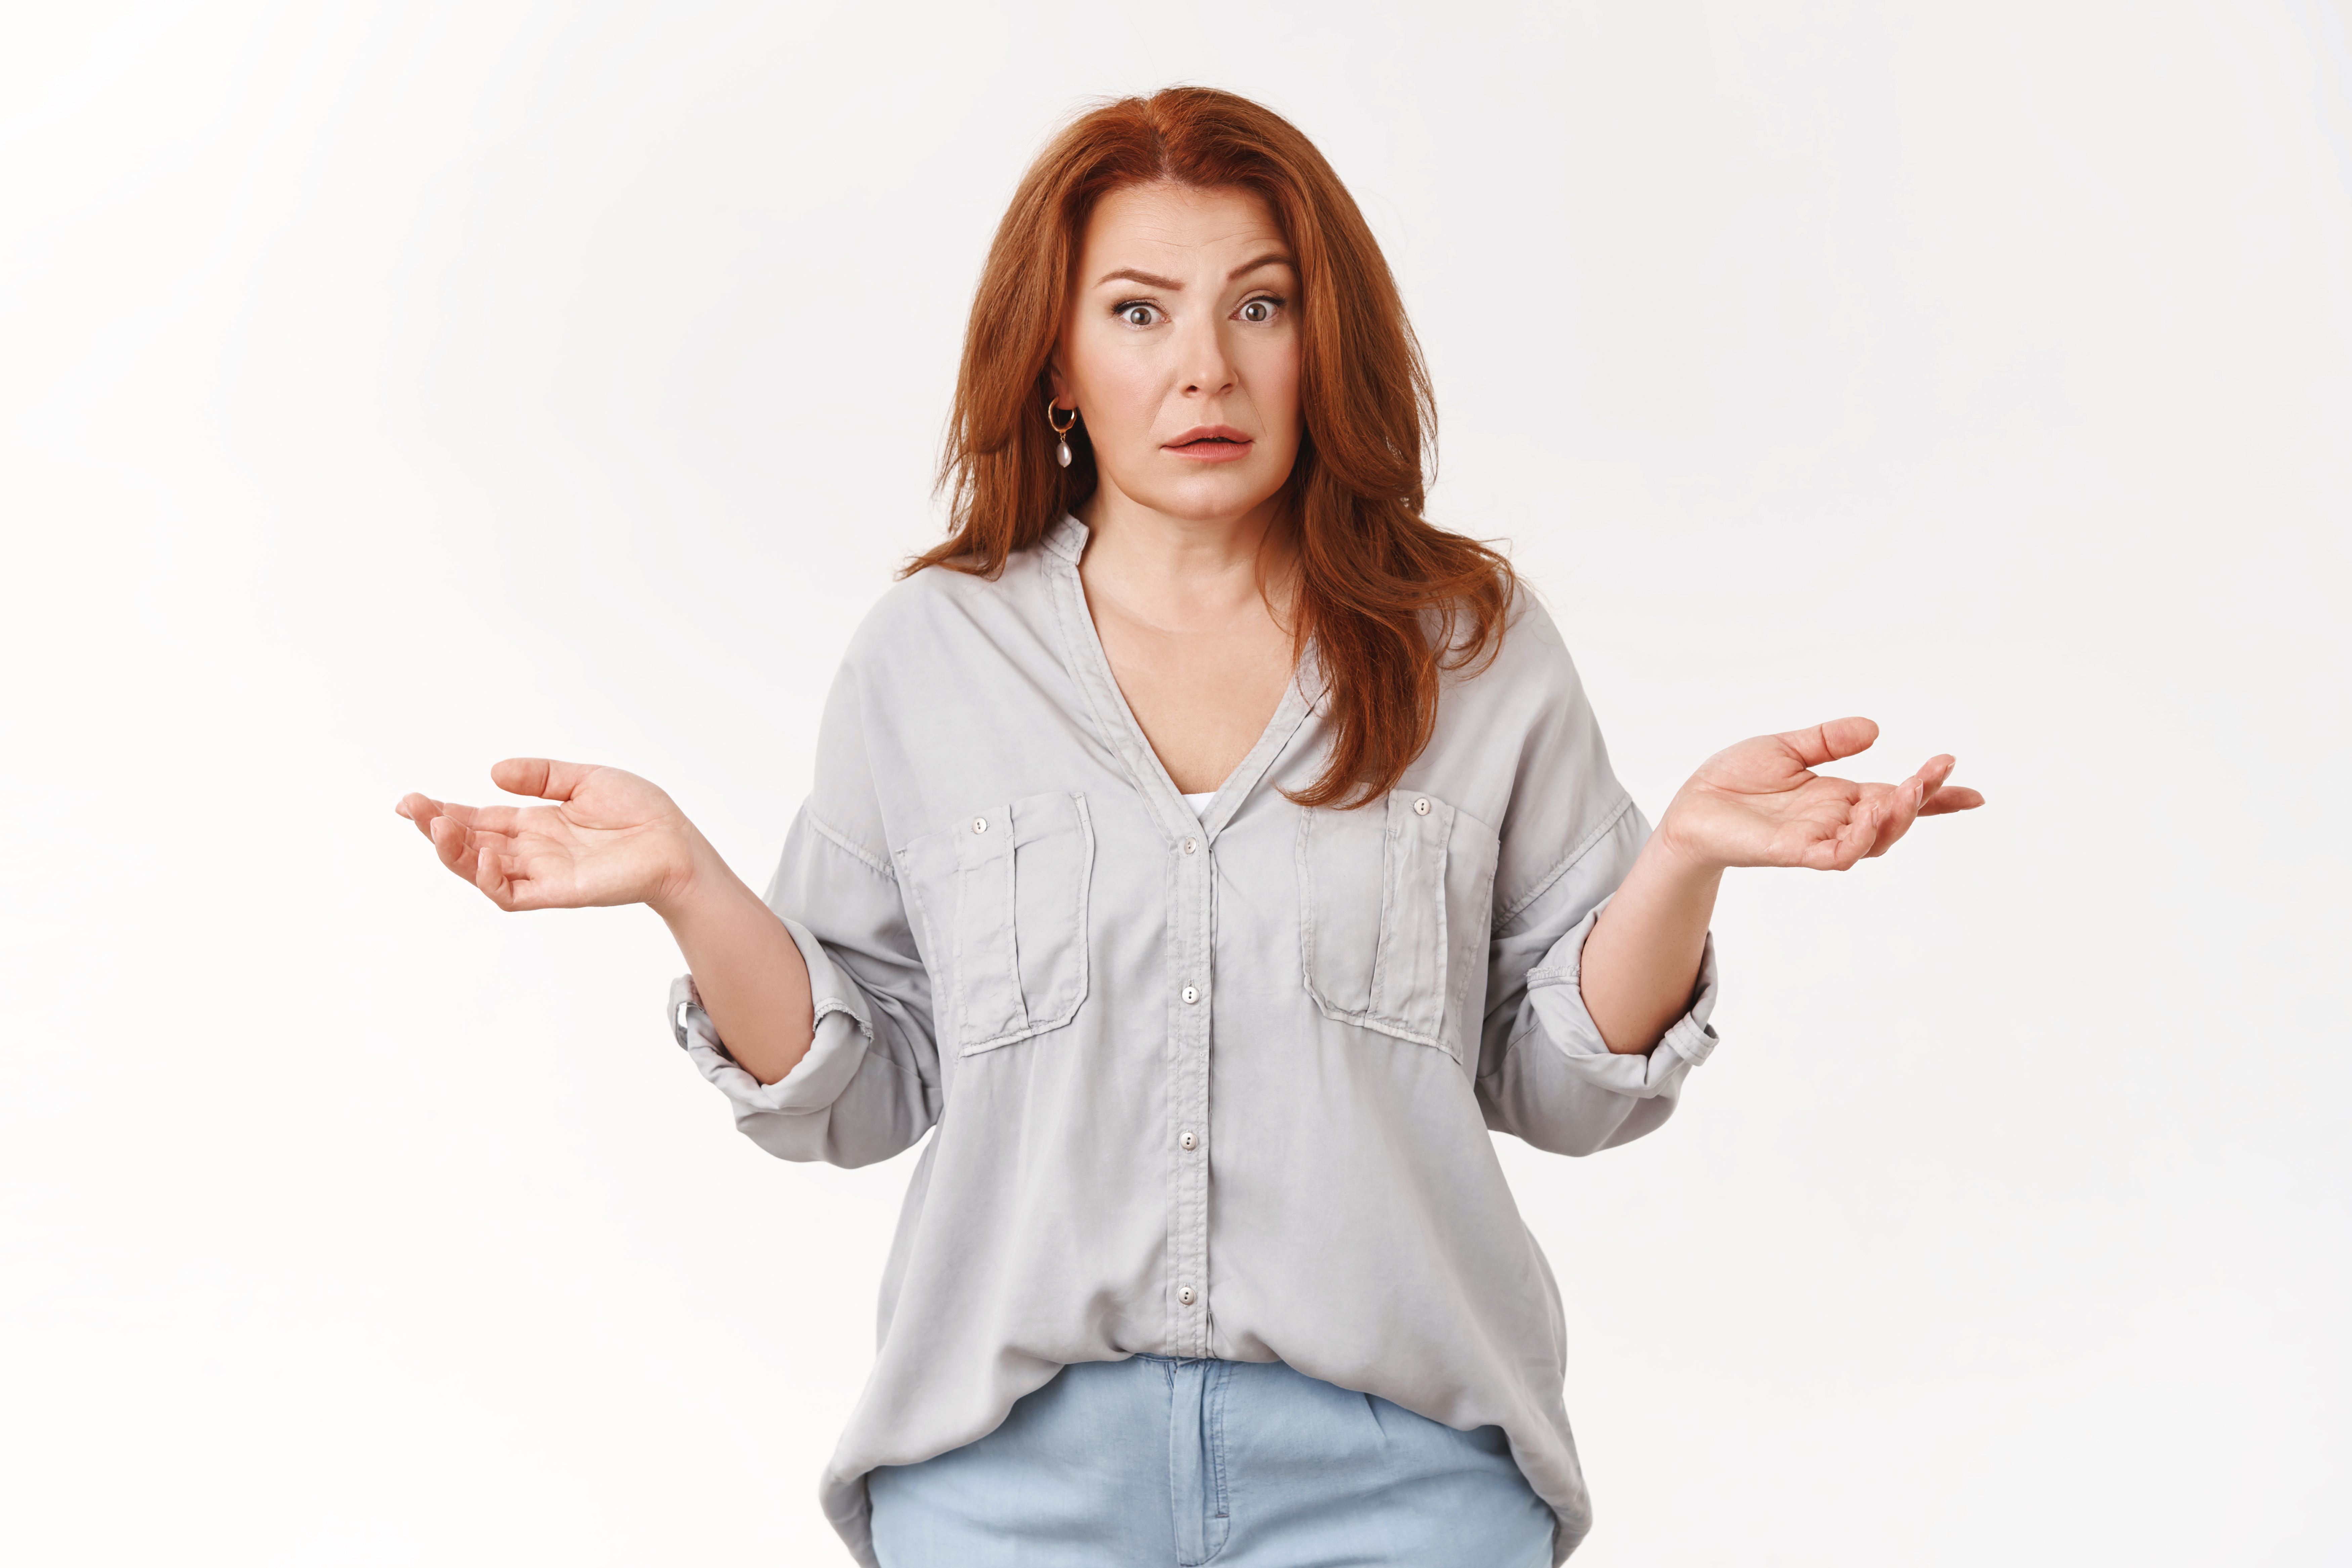 A confused woman with her hands in the air | Source: Shutterstock